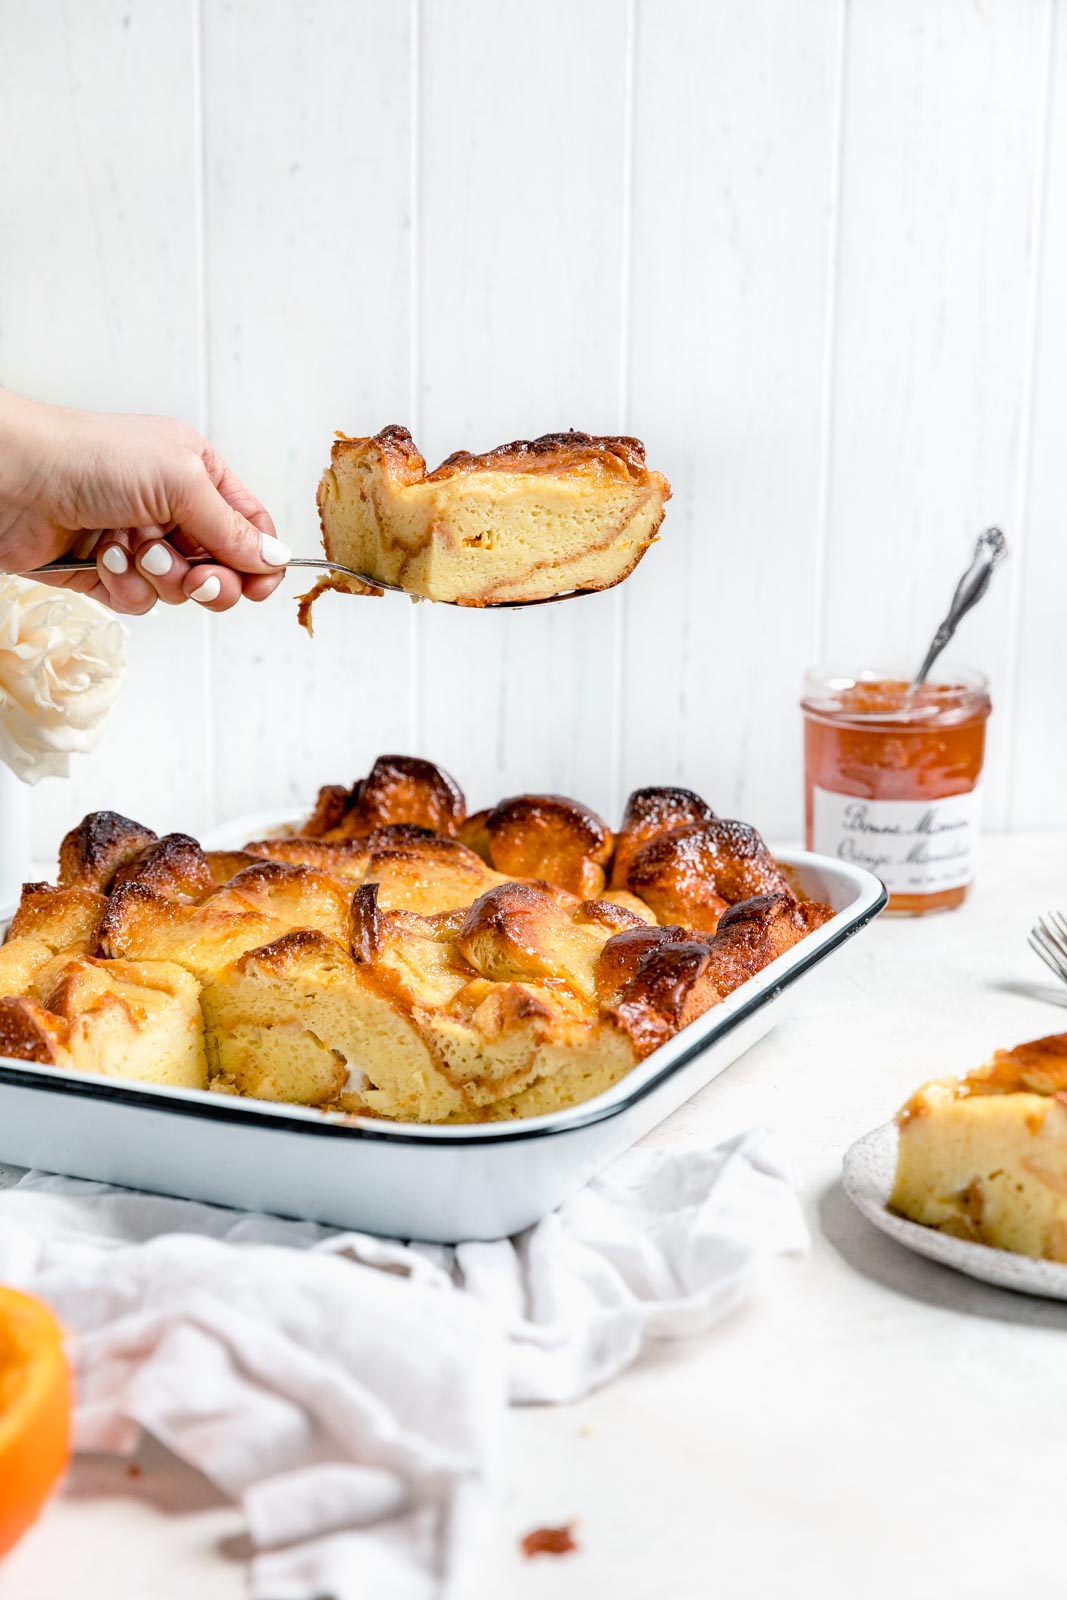 This buttery and bright Orange Marmalade French Toast Bake is perfect for Sunday brunch. It comes together in a pinch and will have everyone coming back for seconds...or thirds :)